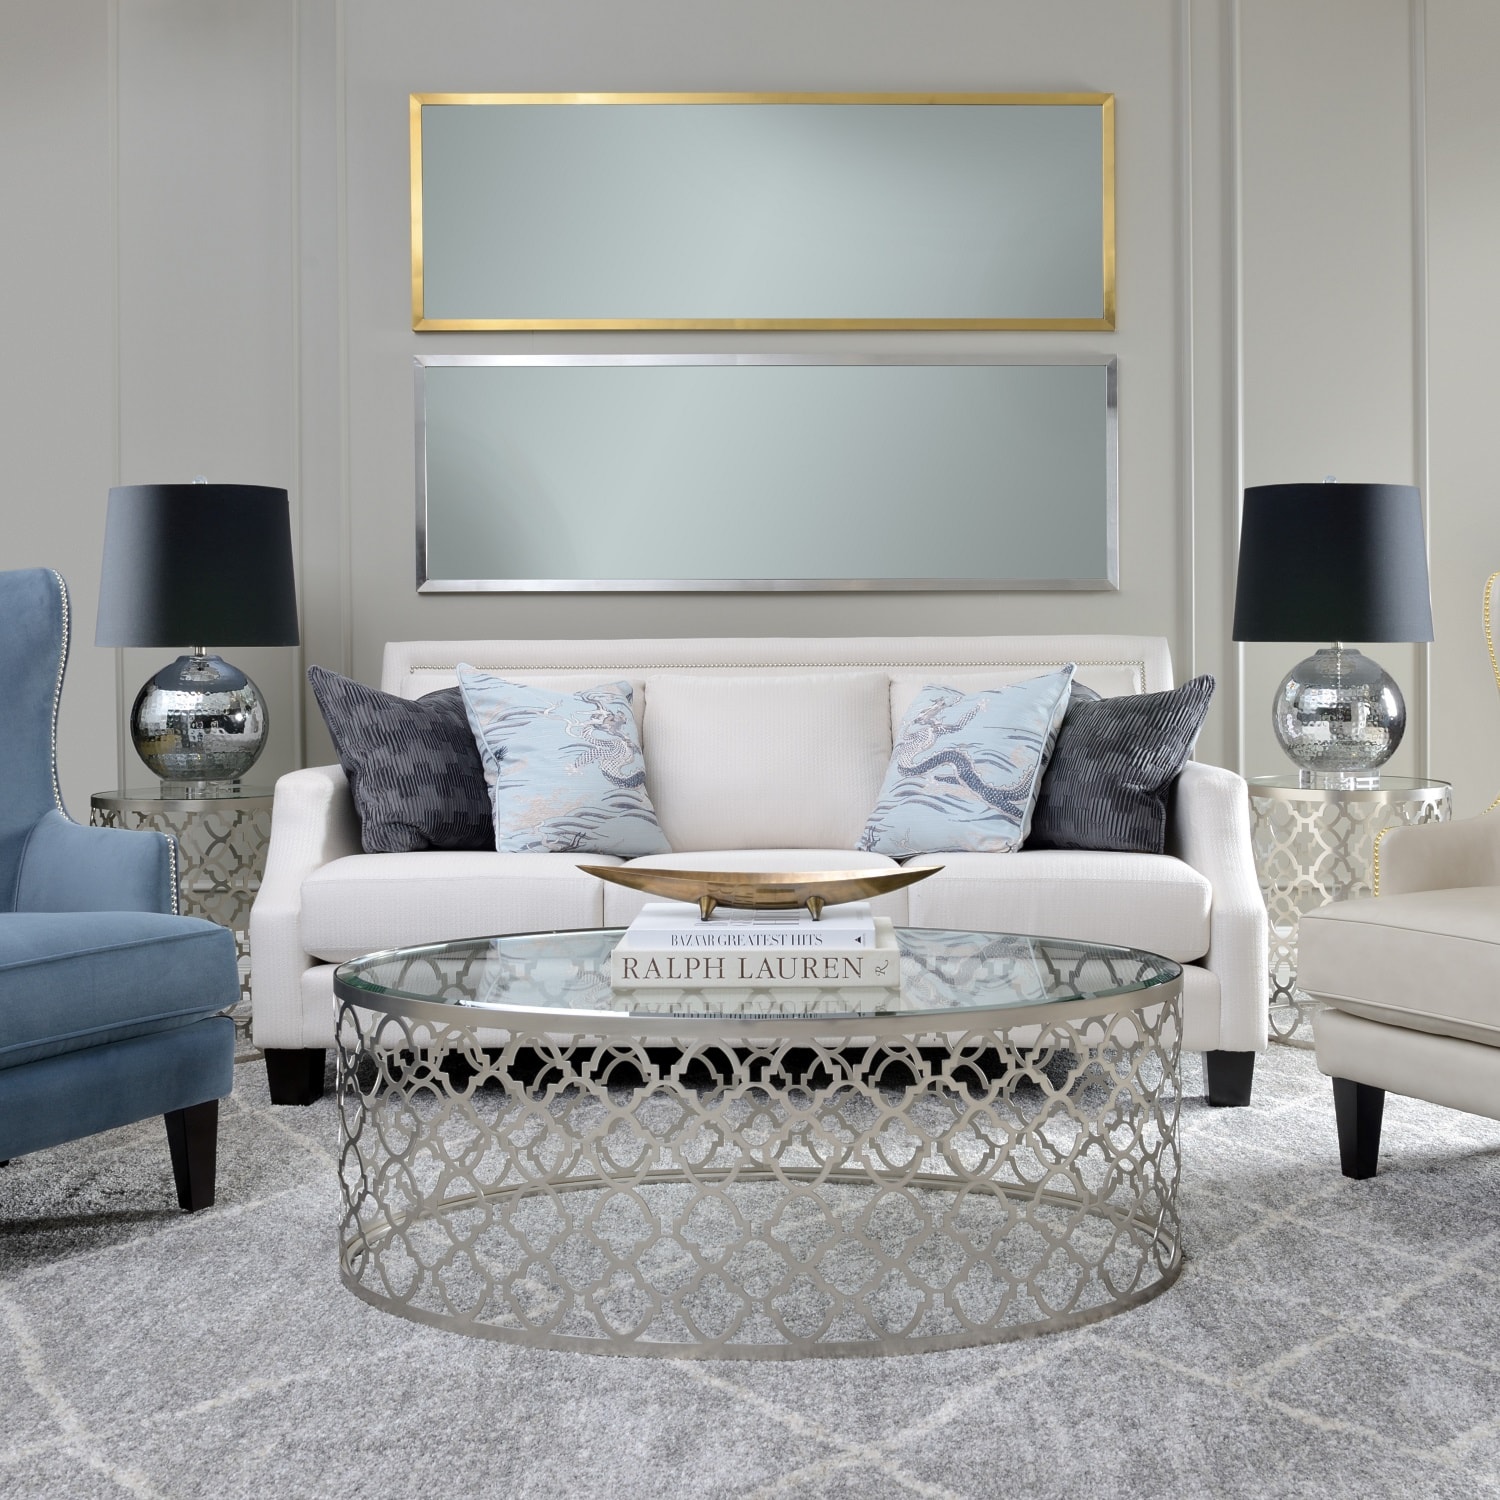 White sofa with mirrors above